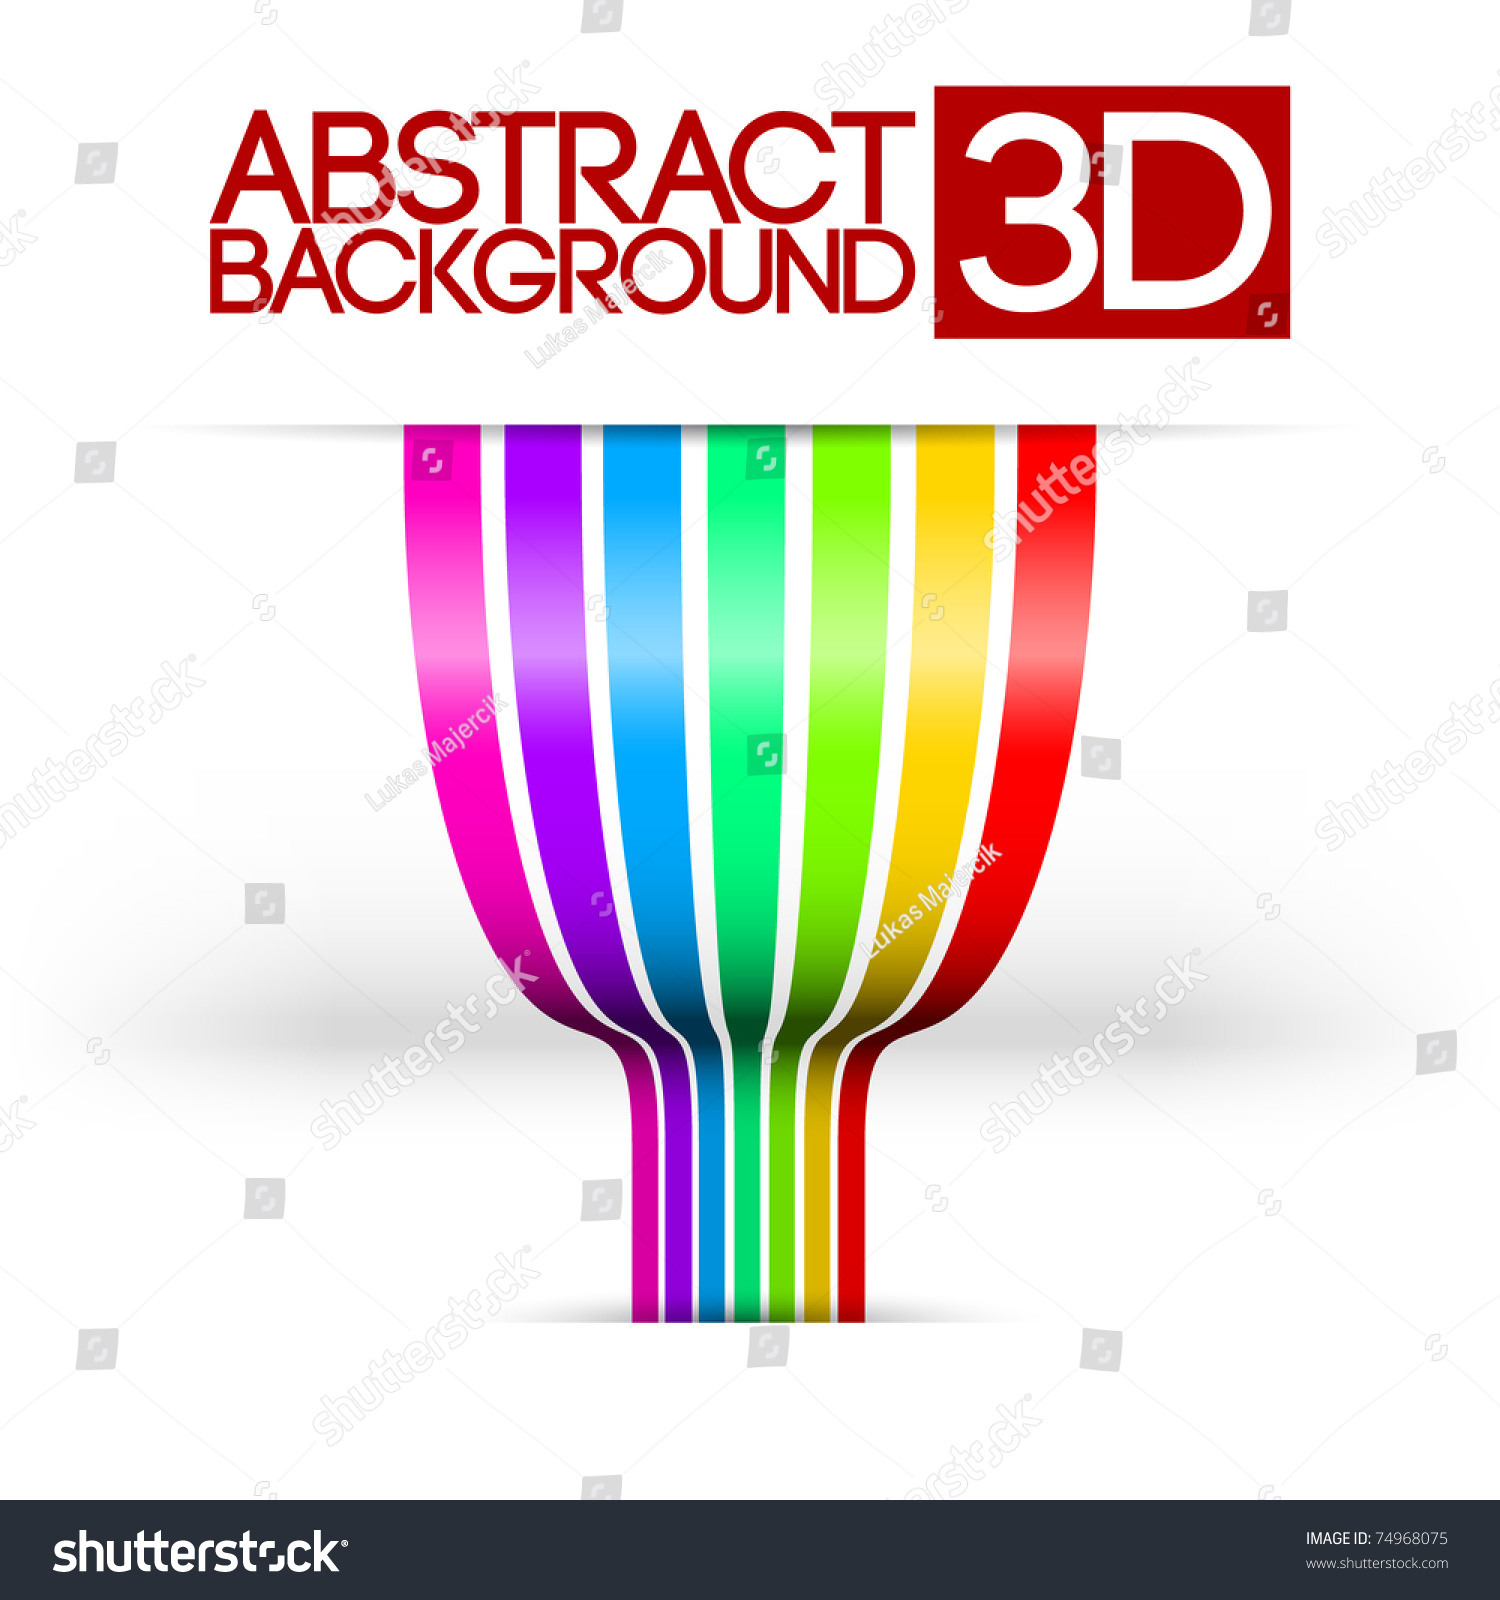 Abstract 3d rainbow colorful stripes vector background #74968075